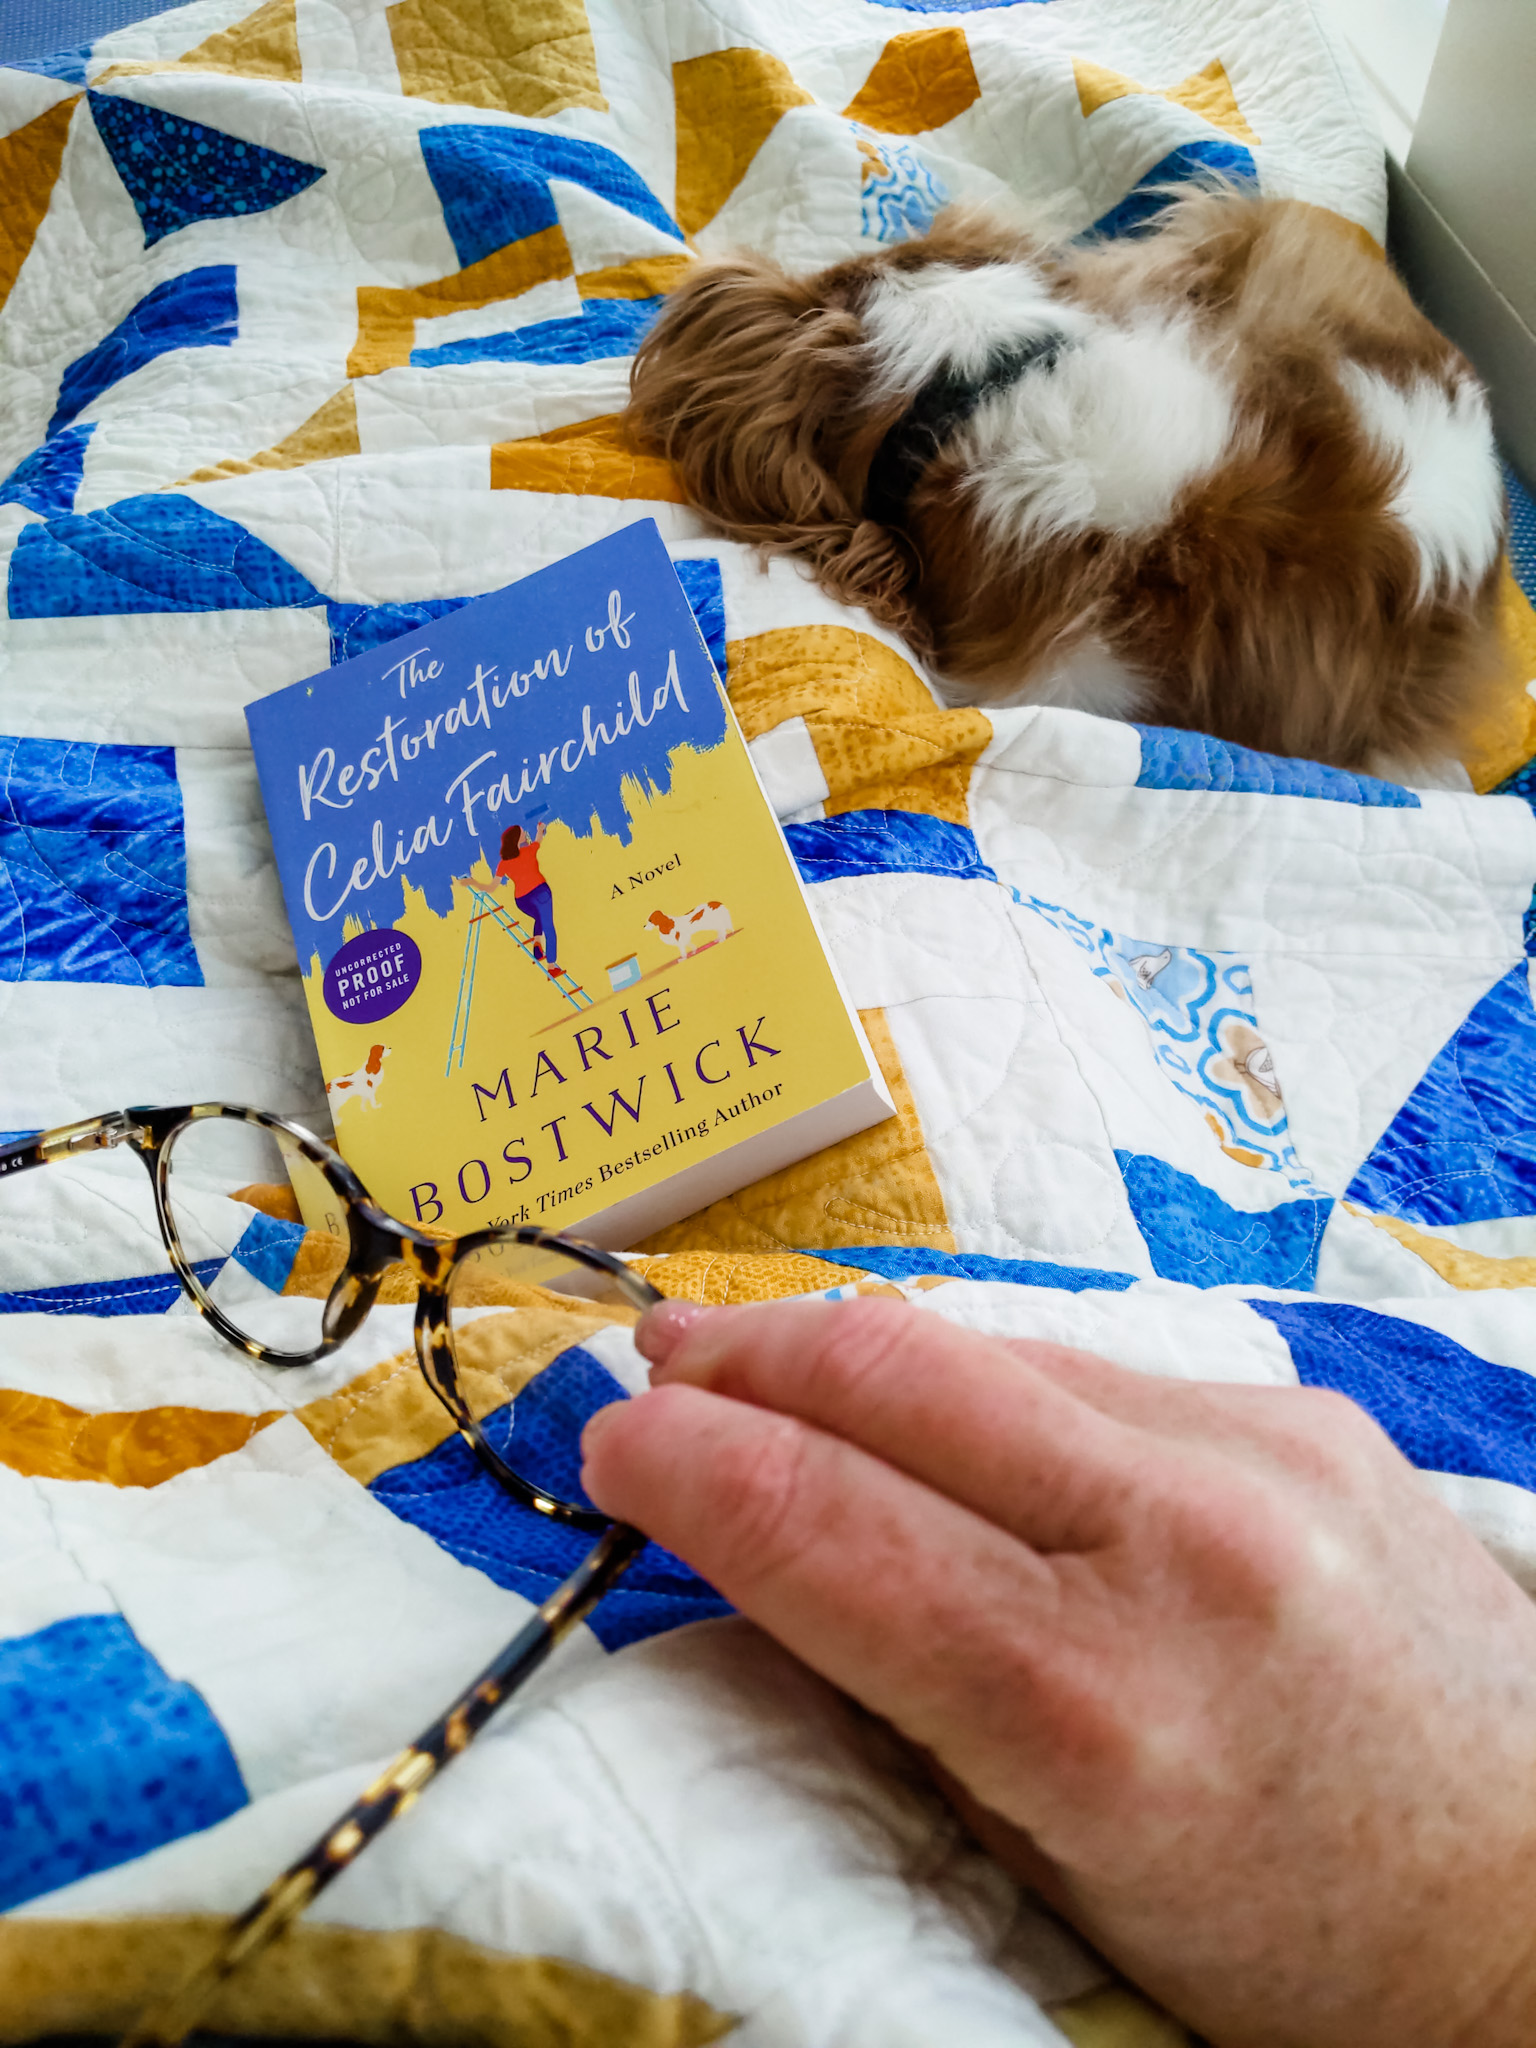 A copy of The Restoration of Celia Fairchild on a quilt, with Marie's sleeping dog in the background.